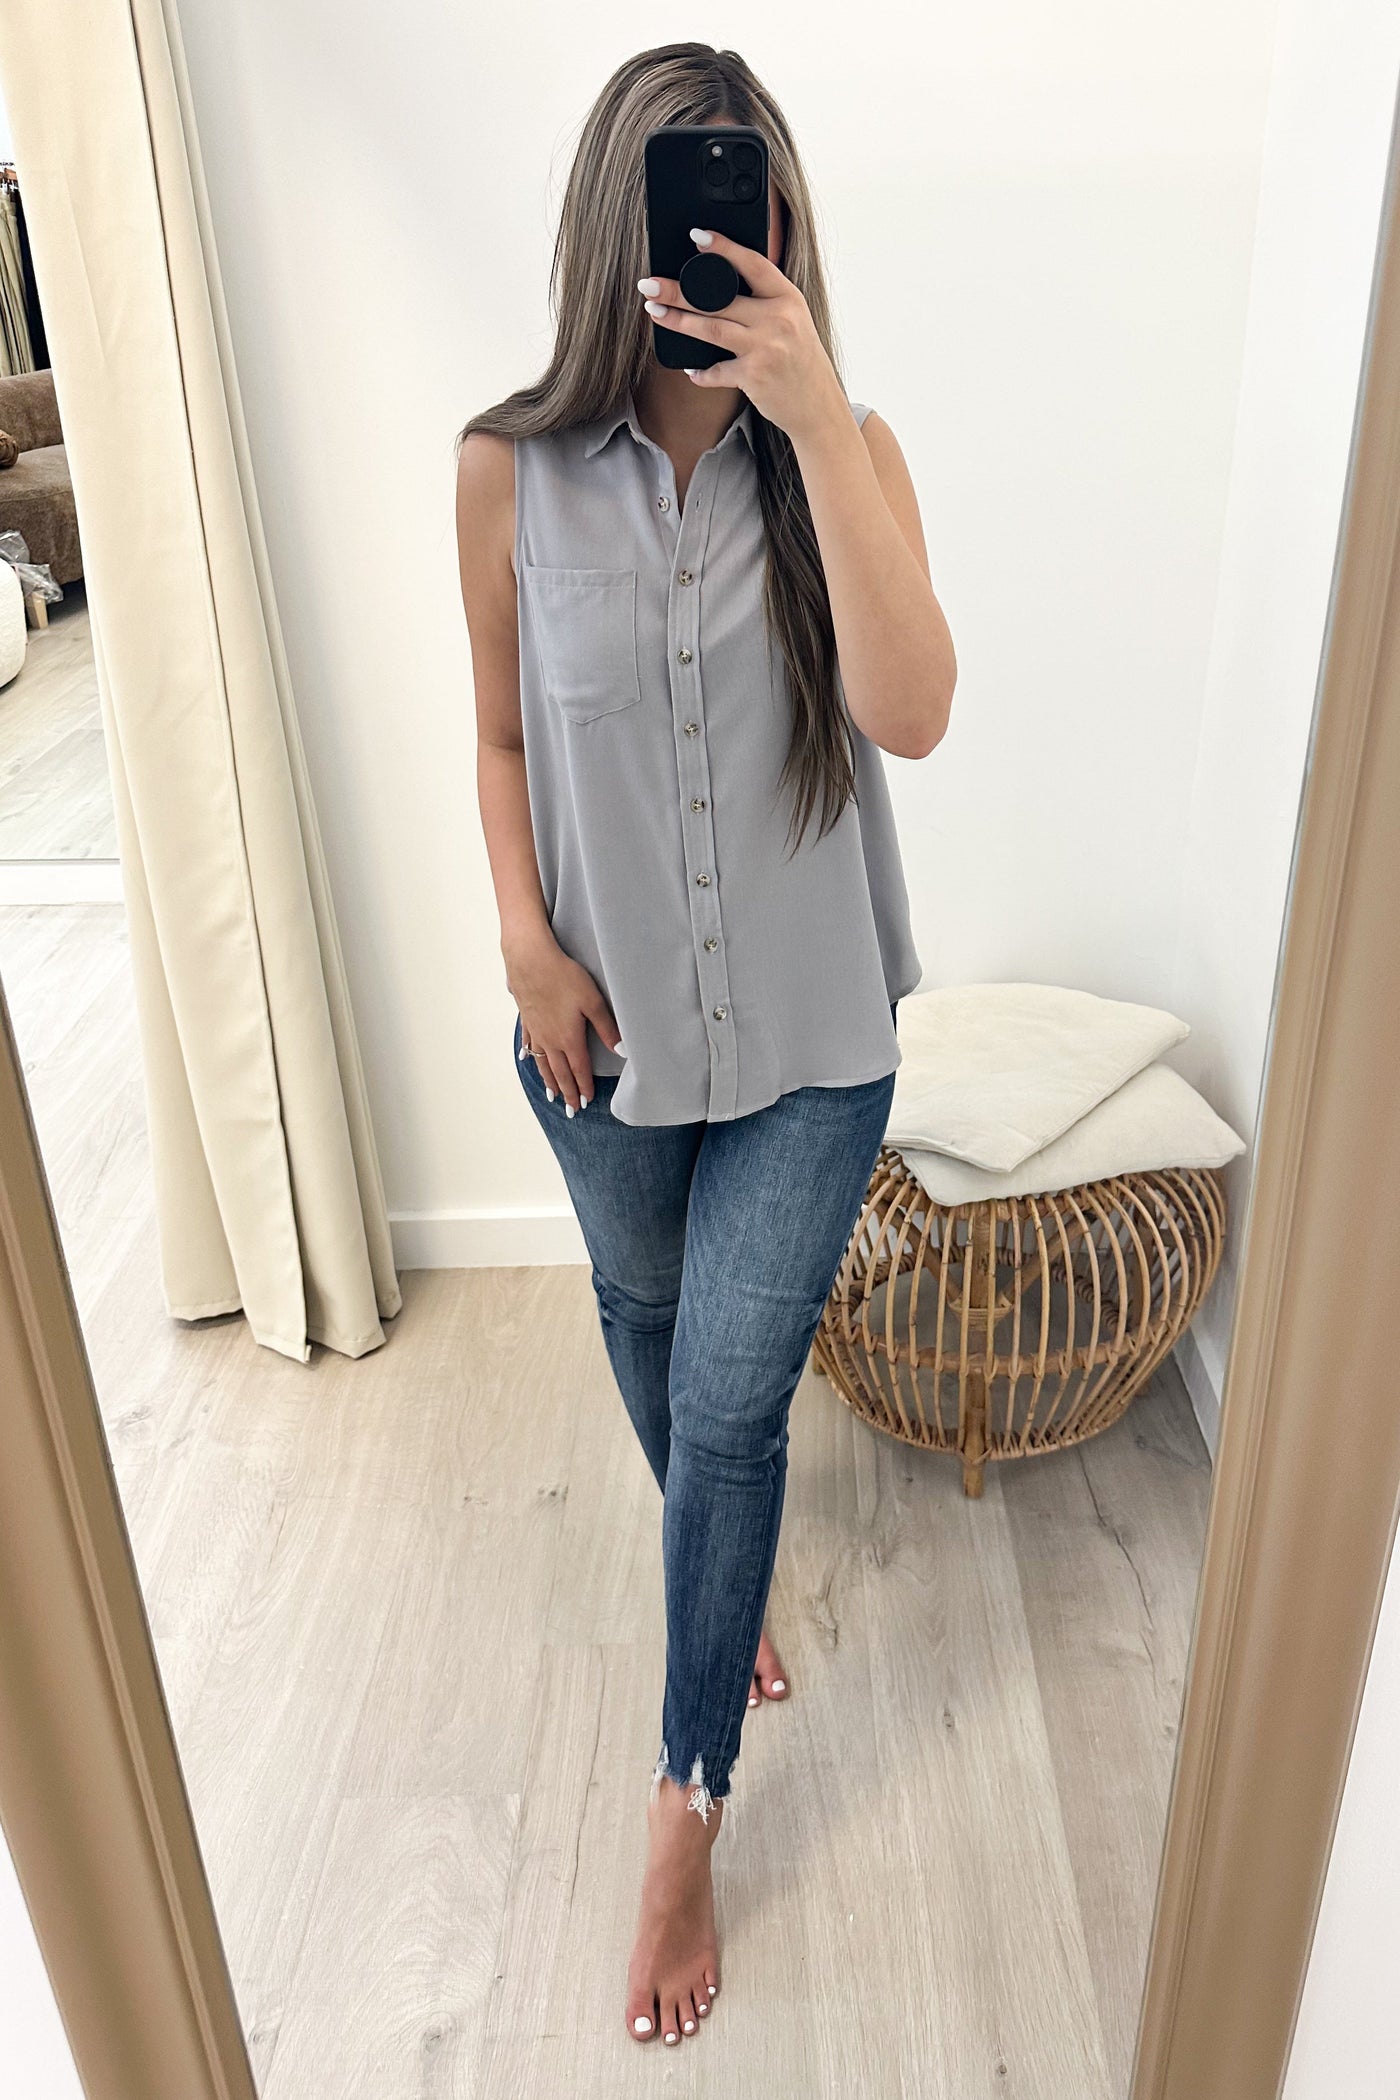 "The Button Race" Blouse (Cloud) - Happily Ever Aften